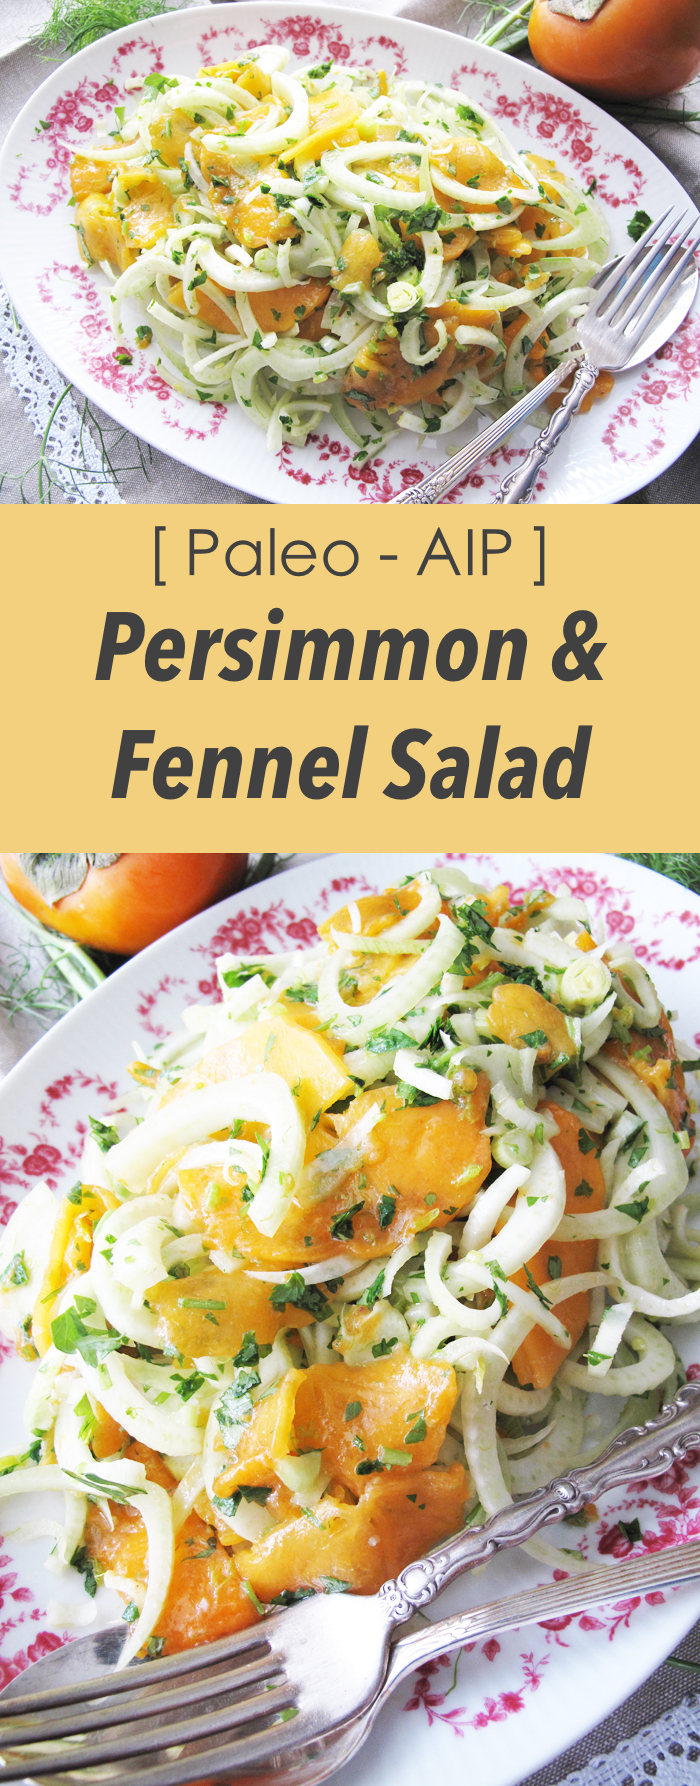 AIP / Paleo Persimmon and Fennel Salad - Fall Recipe for the Holidays